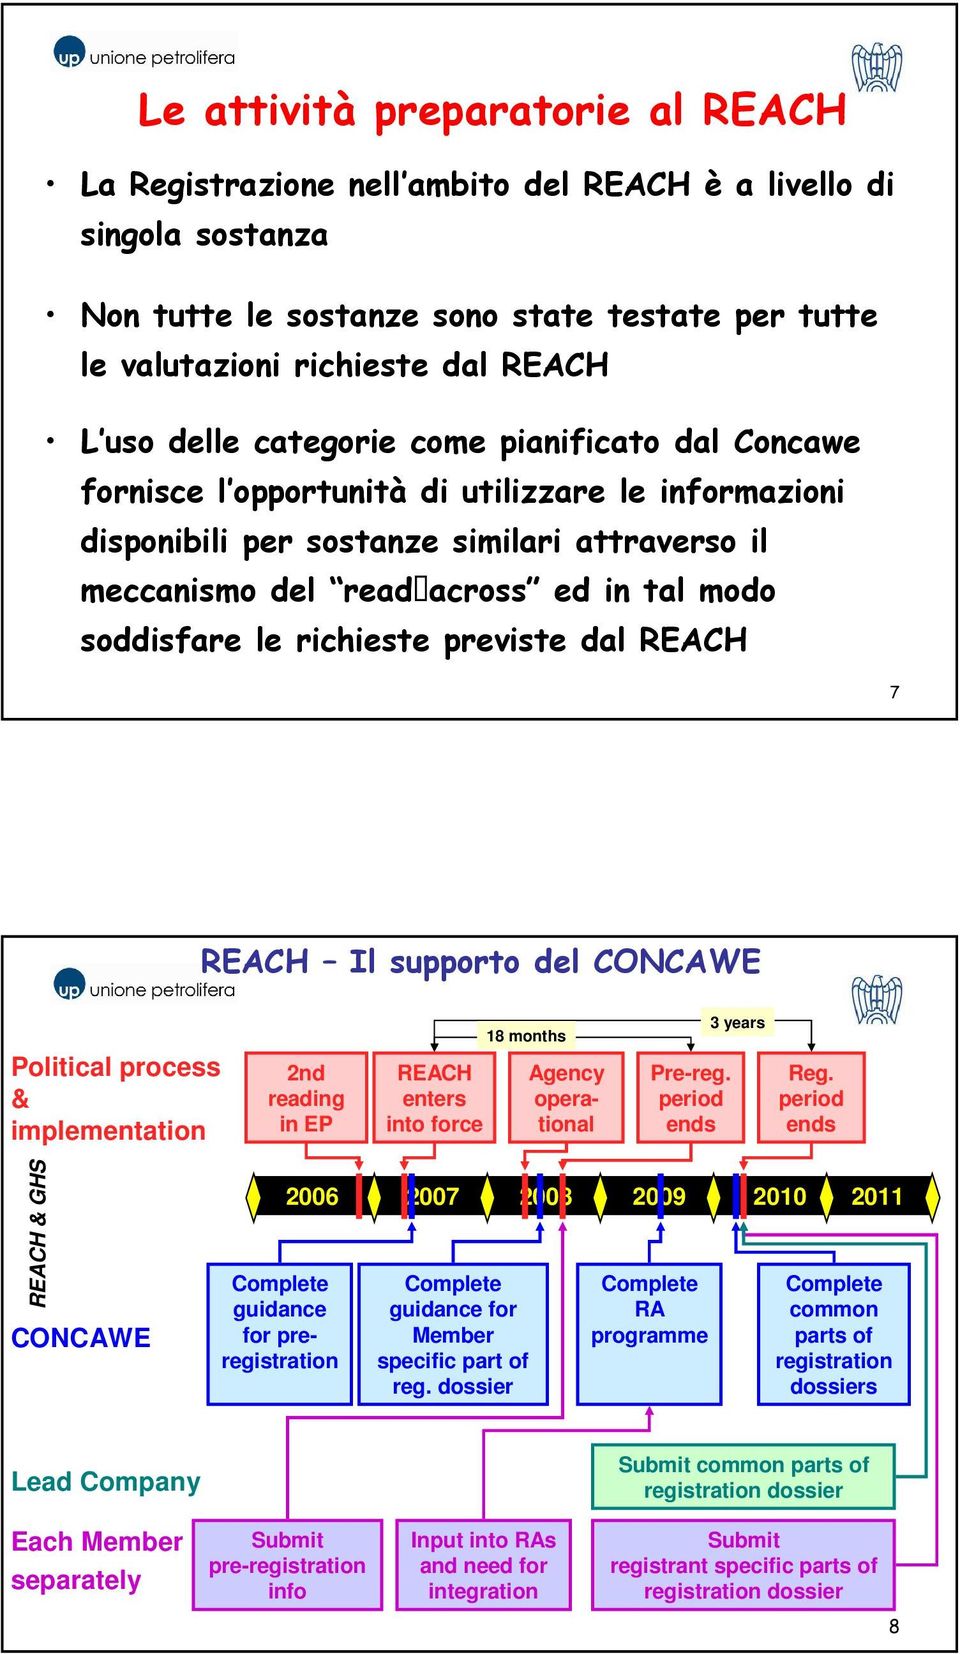 le richieste previste dal REACH 7 REACH Il supporto del CONCAWE Political process & implementation 2nd reading in EP REACH enters into force 18 months Agency operational Pre-reg.